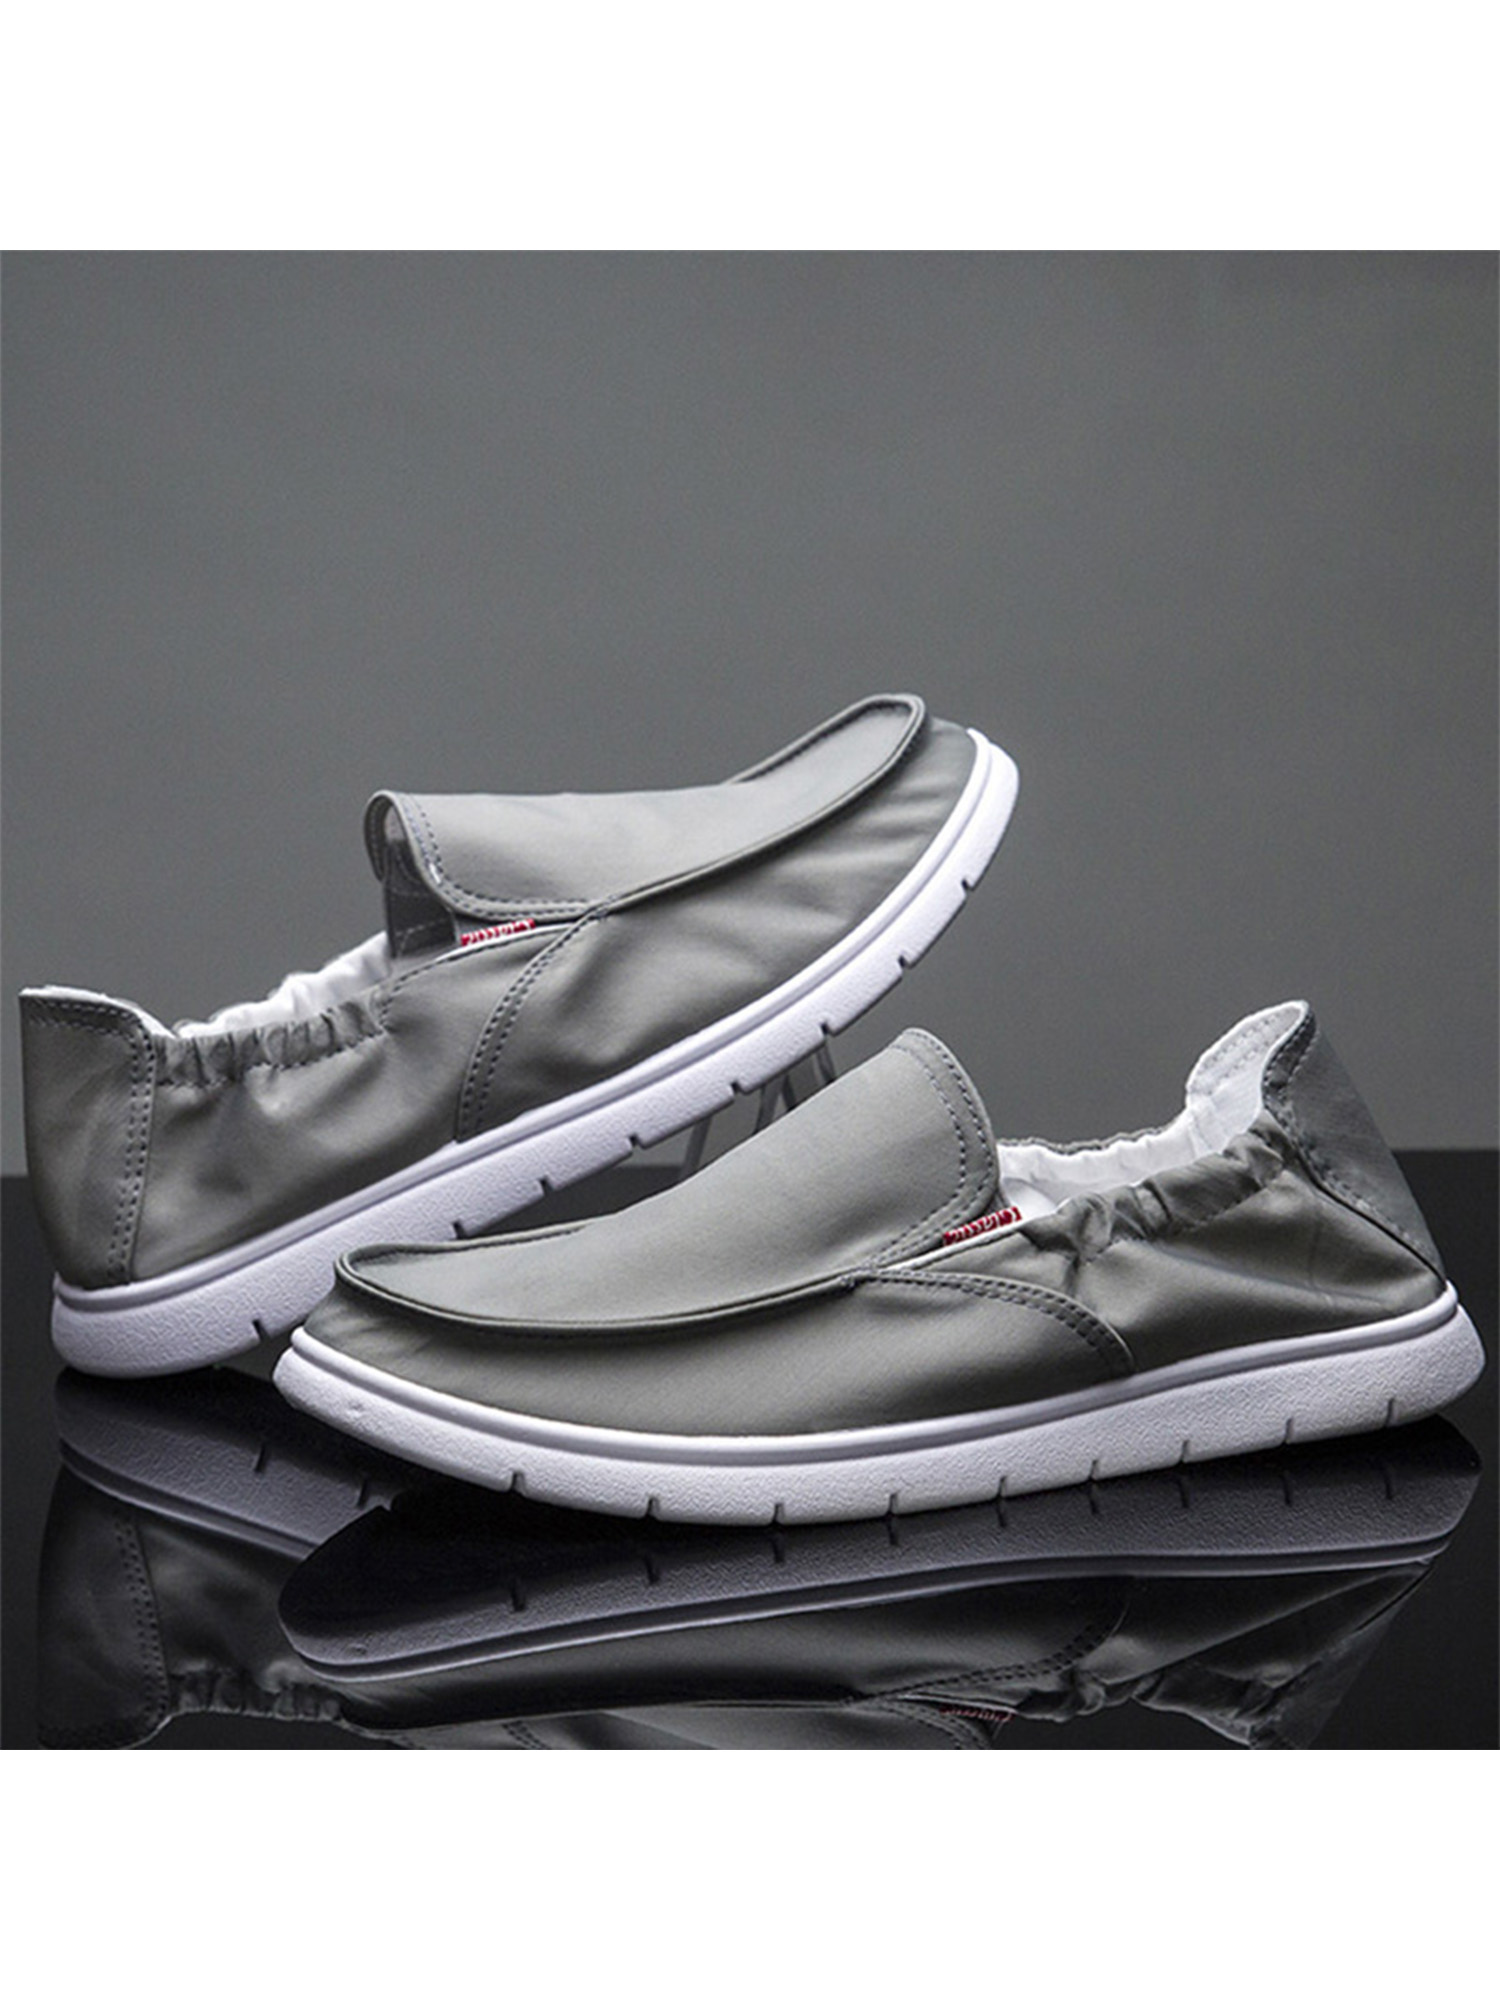 UKAP Casual Canvas Shoes for Men Slip On Loafers Deck Shoes Comfortable Boat Shoes Outdoor Fashion - image 3 of 5